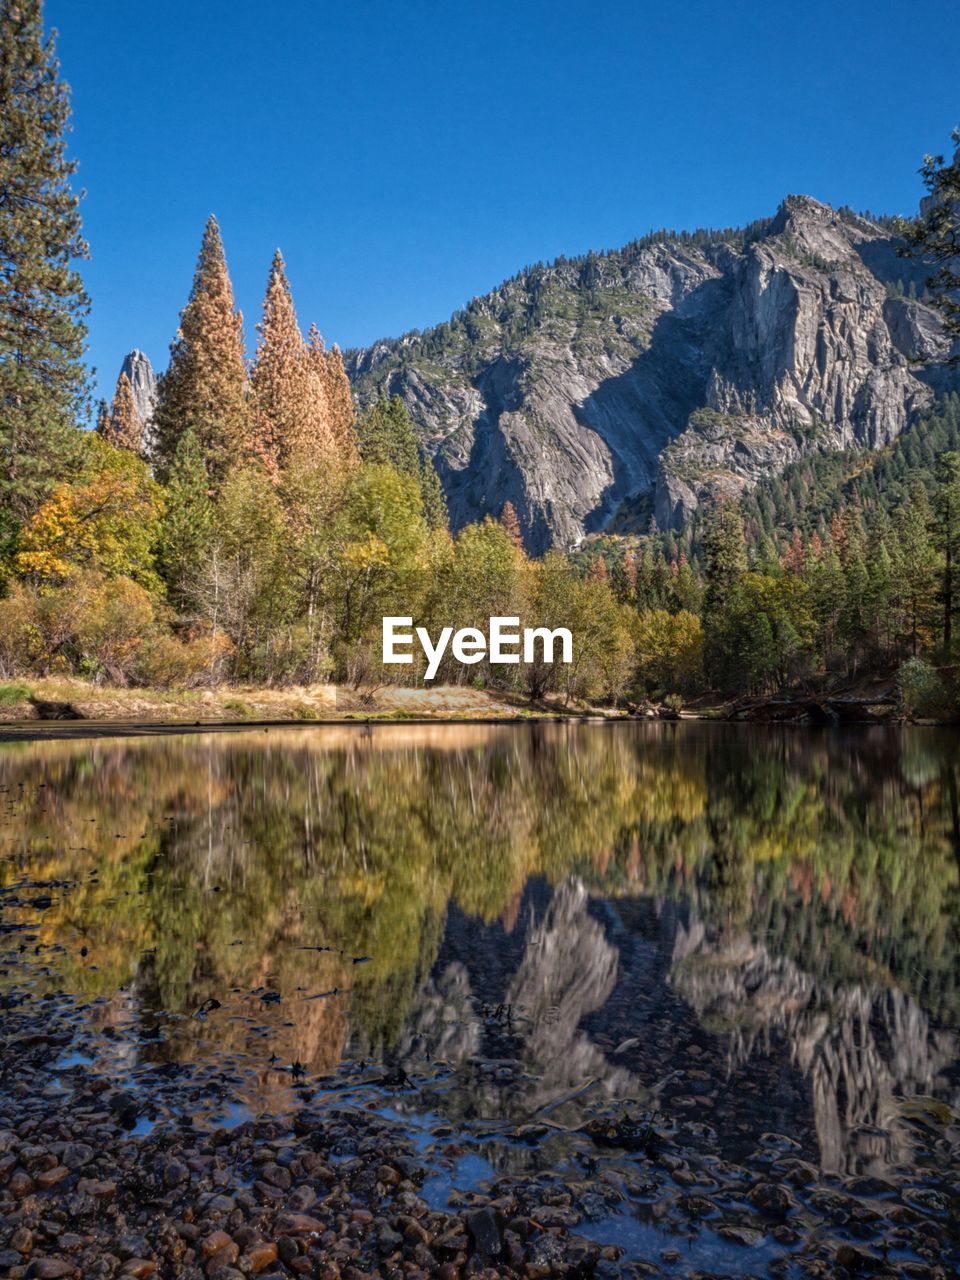 Reflection of trees and rocky mountains on calm lake at yosemite national park